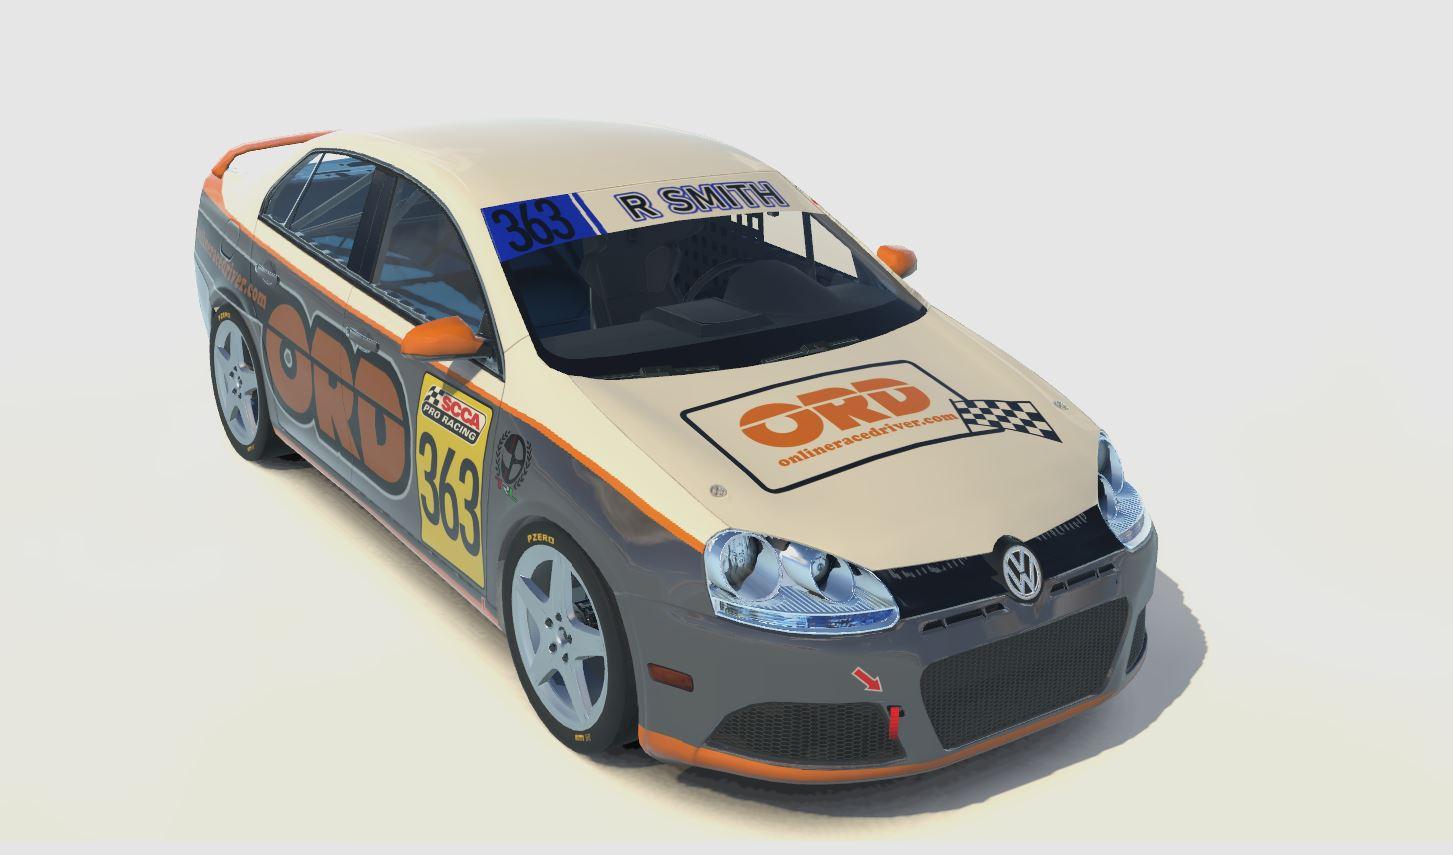 Preview of ORD   Jetta   R Smith by Lee Walker5